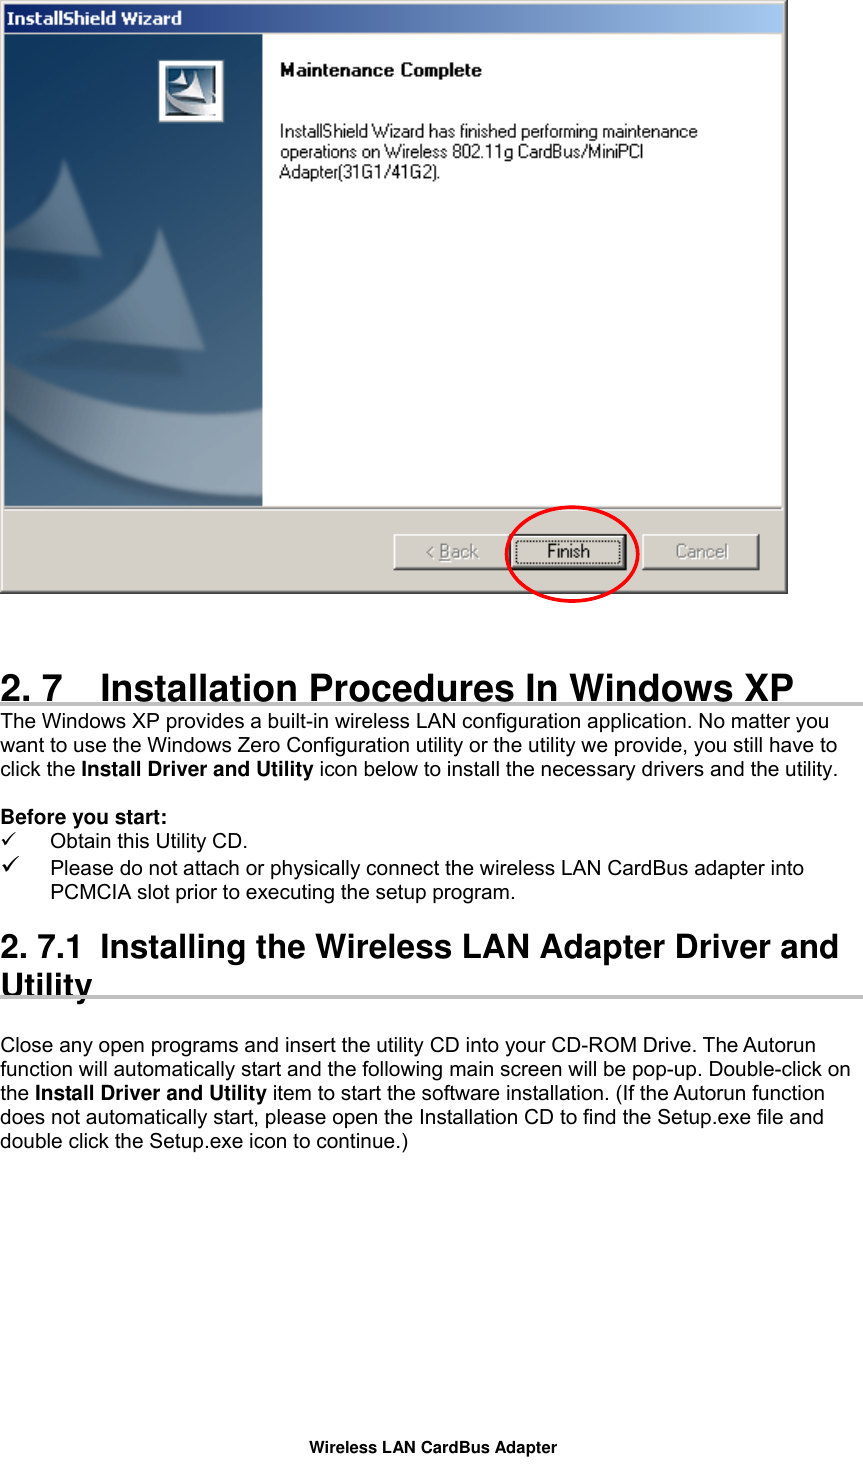    2. 7  Installation Procedures In Windows XP The Windows XP provides a built-in wireless LAN configuration application. No matter you want to use the Windows Zero Configuration utility or the utility we provide, you still have to click the Install Driver and Utility icon below to install the necessary drivers and the utility.  Before you start:   Obtain this Utility CD.   Please do not attach or physically connect the wireless LAN CardBus adapter into PCMCIA slot prior to executing the setup program.    2. 7.1  Installing the Wireless LAN Adapter Driver and Utility   Close any open programs and insert the utility CD into your CD-ROM Drive. The Autorun function will automatically start and the following main screen will be pop-up. Double-click on the Install Driver and Utility item to start the software installation. (If the Autorun function does not automatically start, please open the Installation CD to find the Setup.exe file and double click the Setup.exe icon to continue.)    Wireless LAN CardBus Adapter 